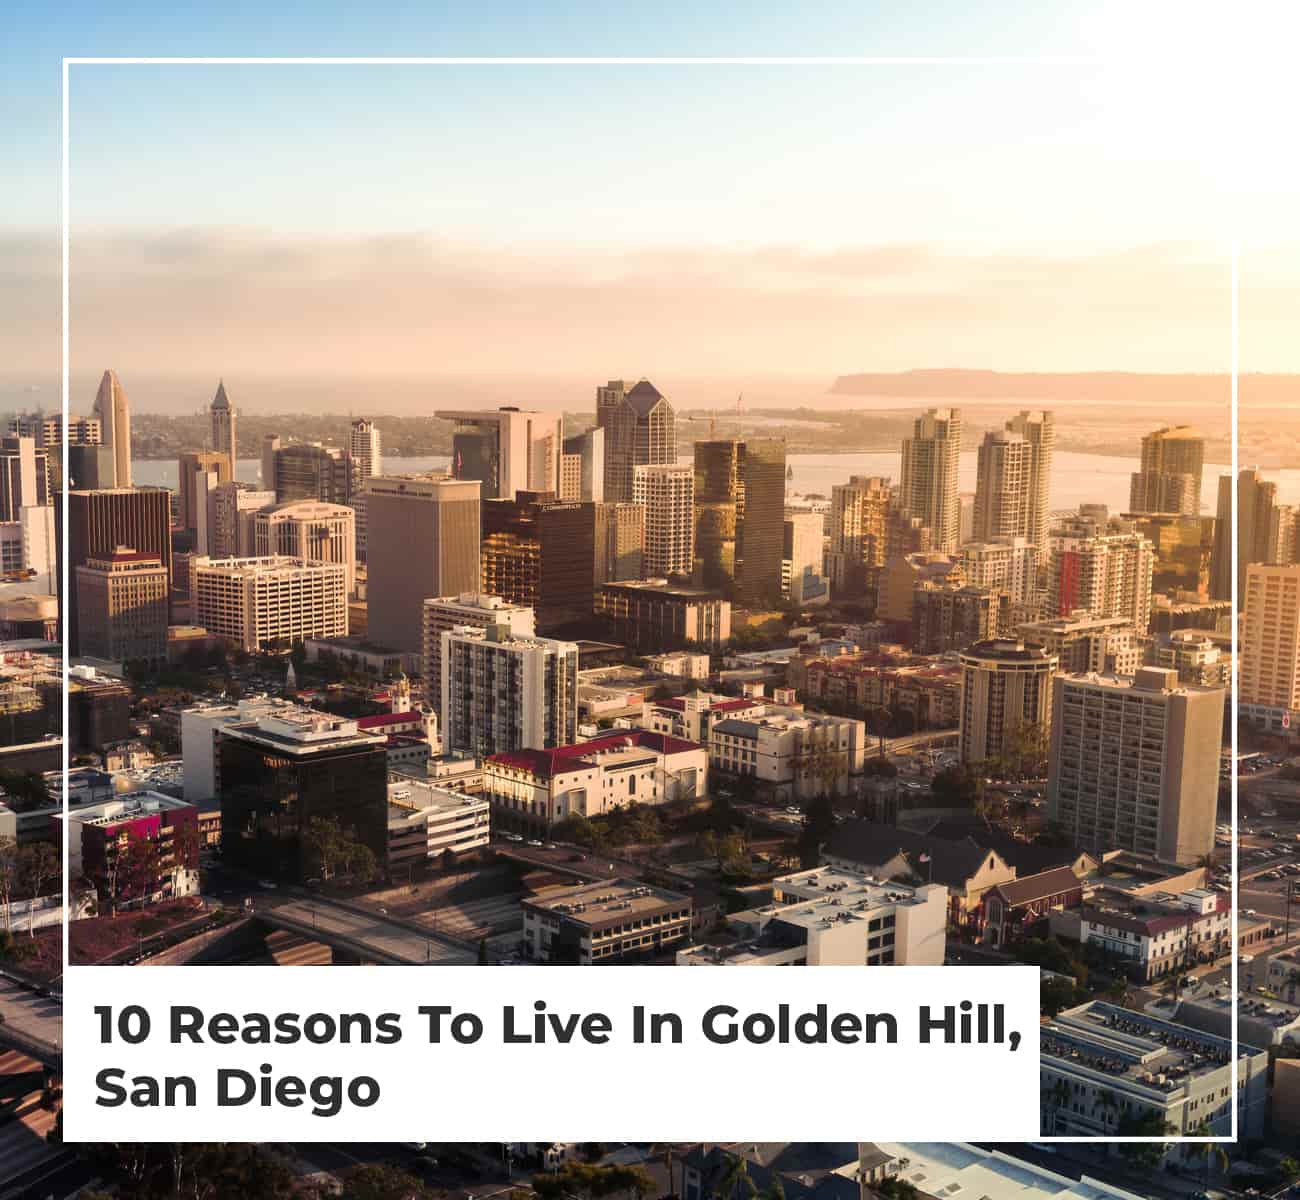 10 Reasons To Live In Golden Hill, San Diego